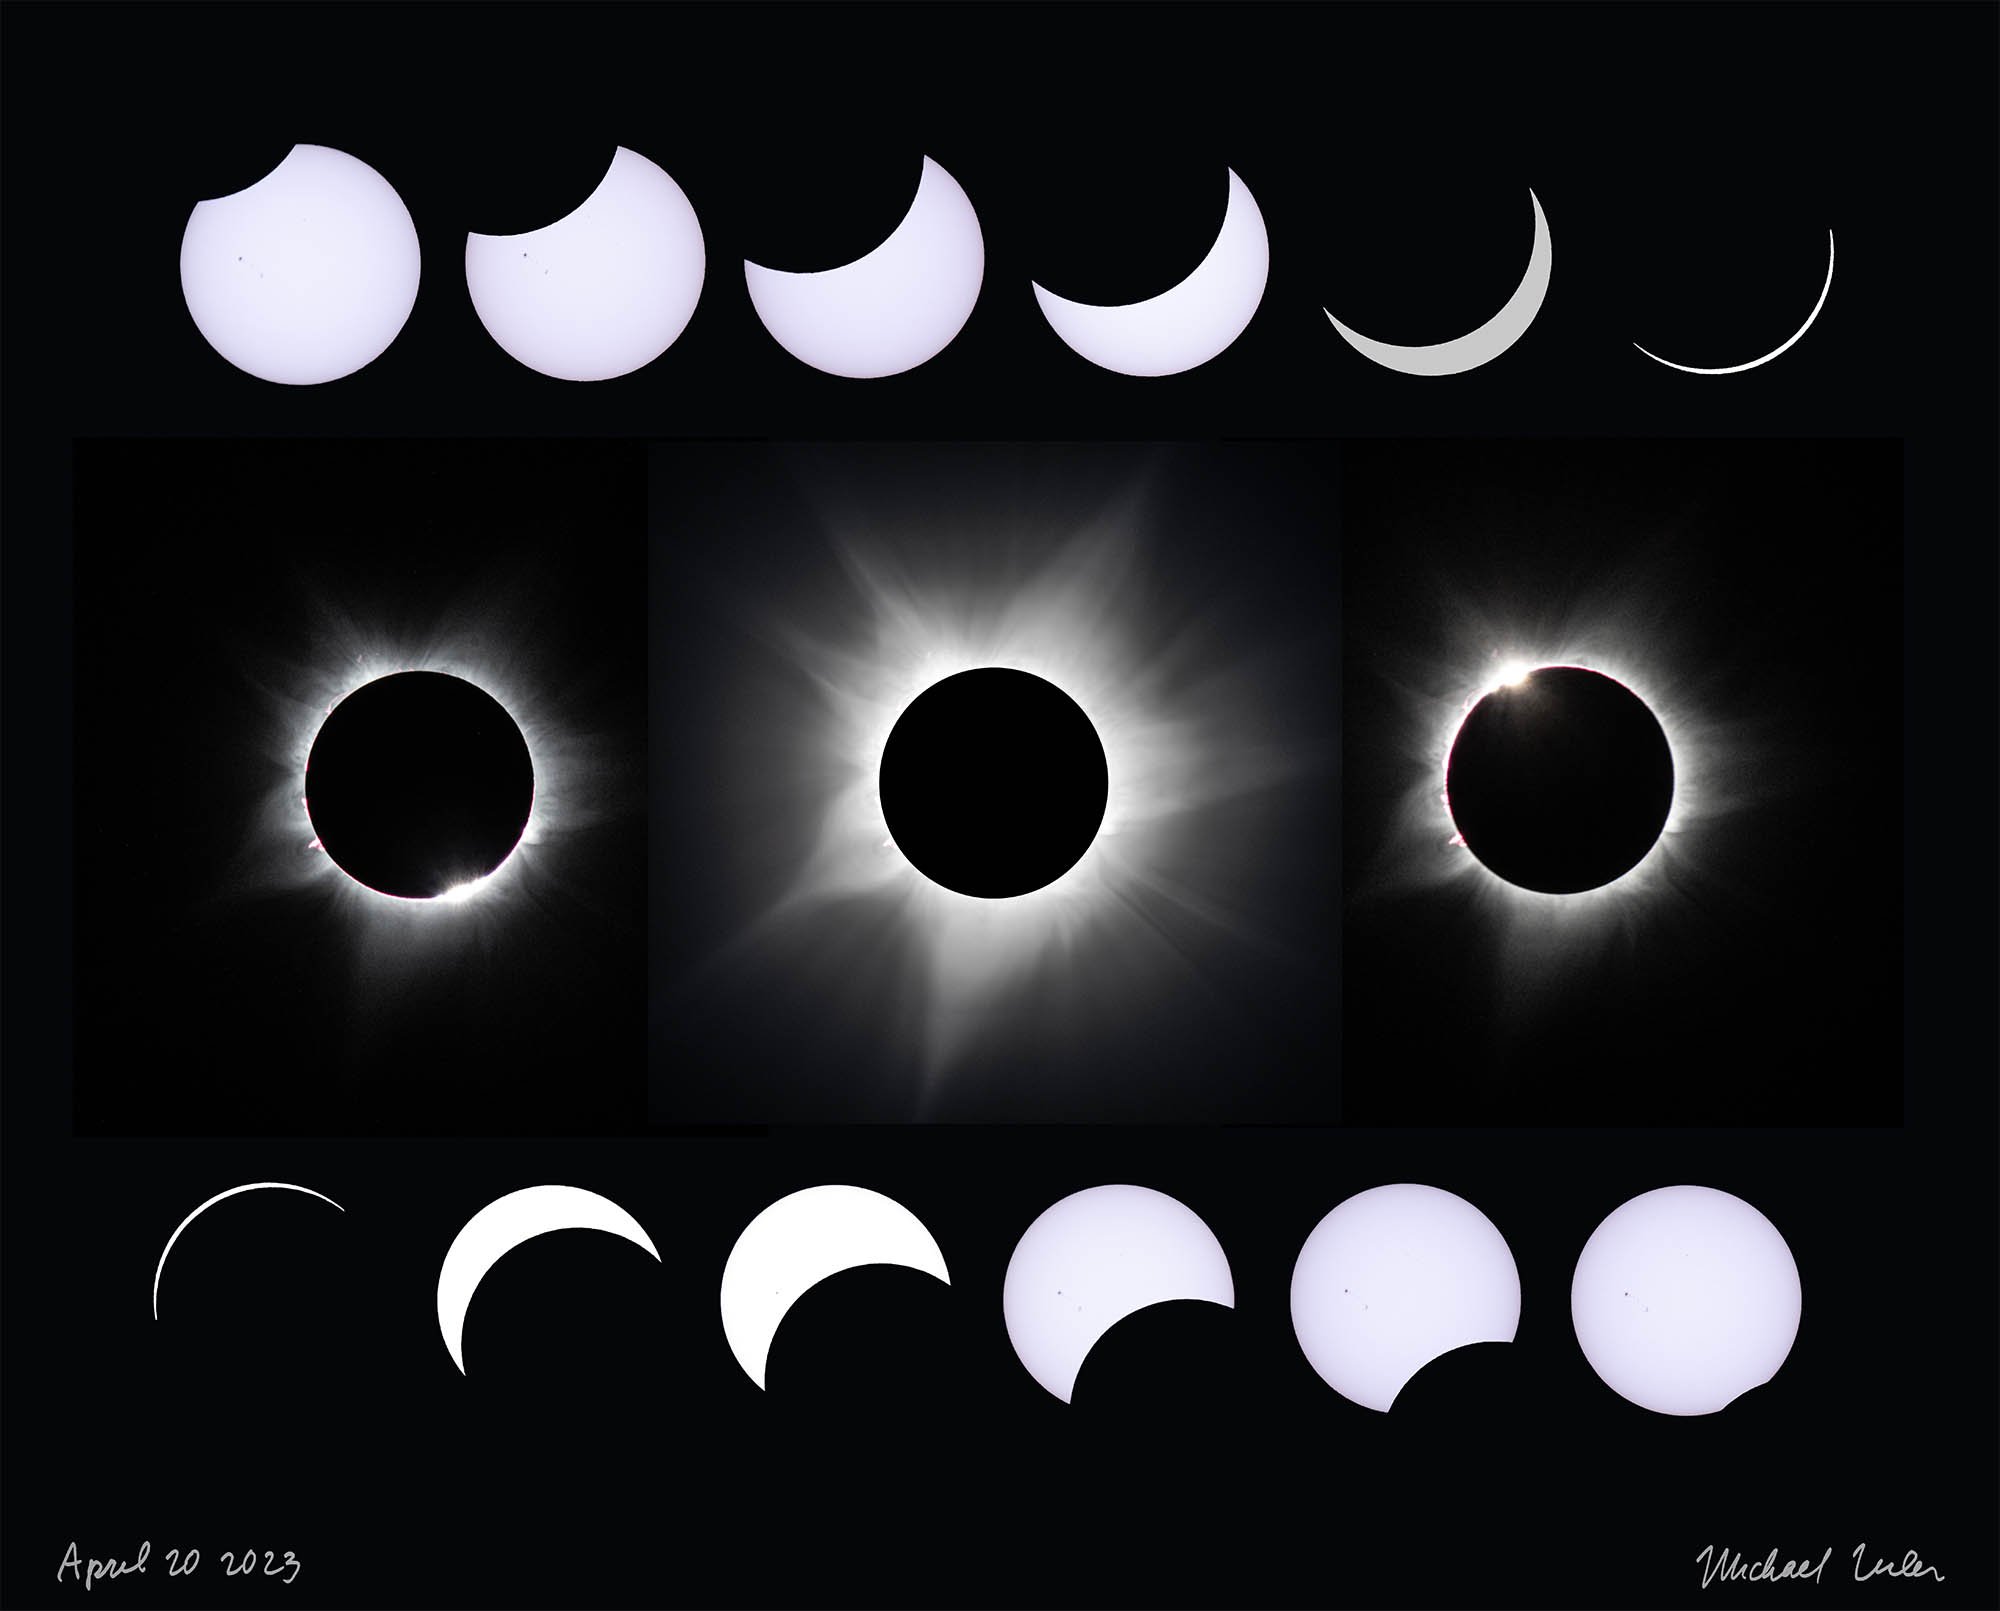 Don't Miss a Second! A Breakdown of the Total Solar Eclipse's Stages and Durations